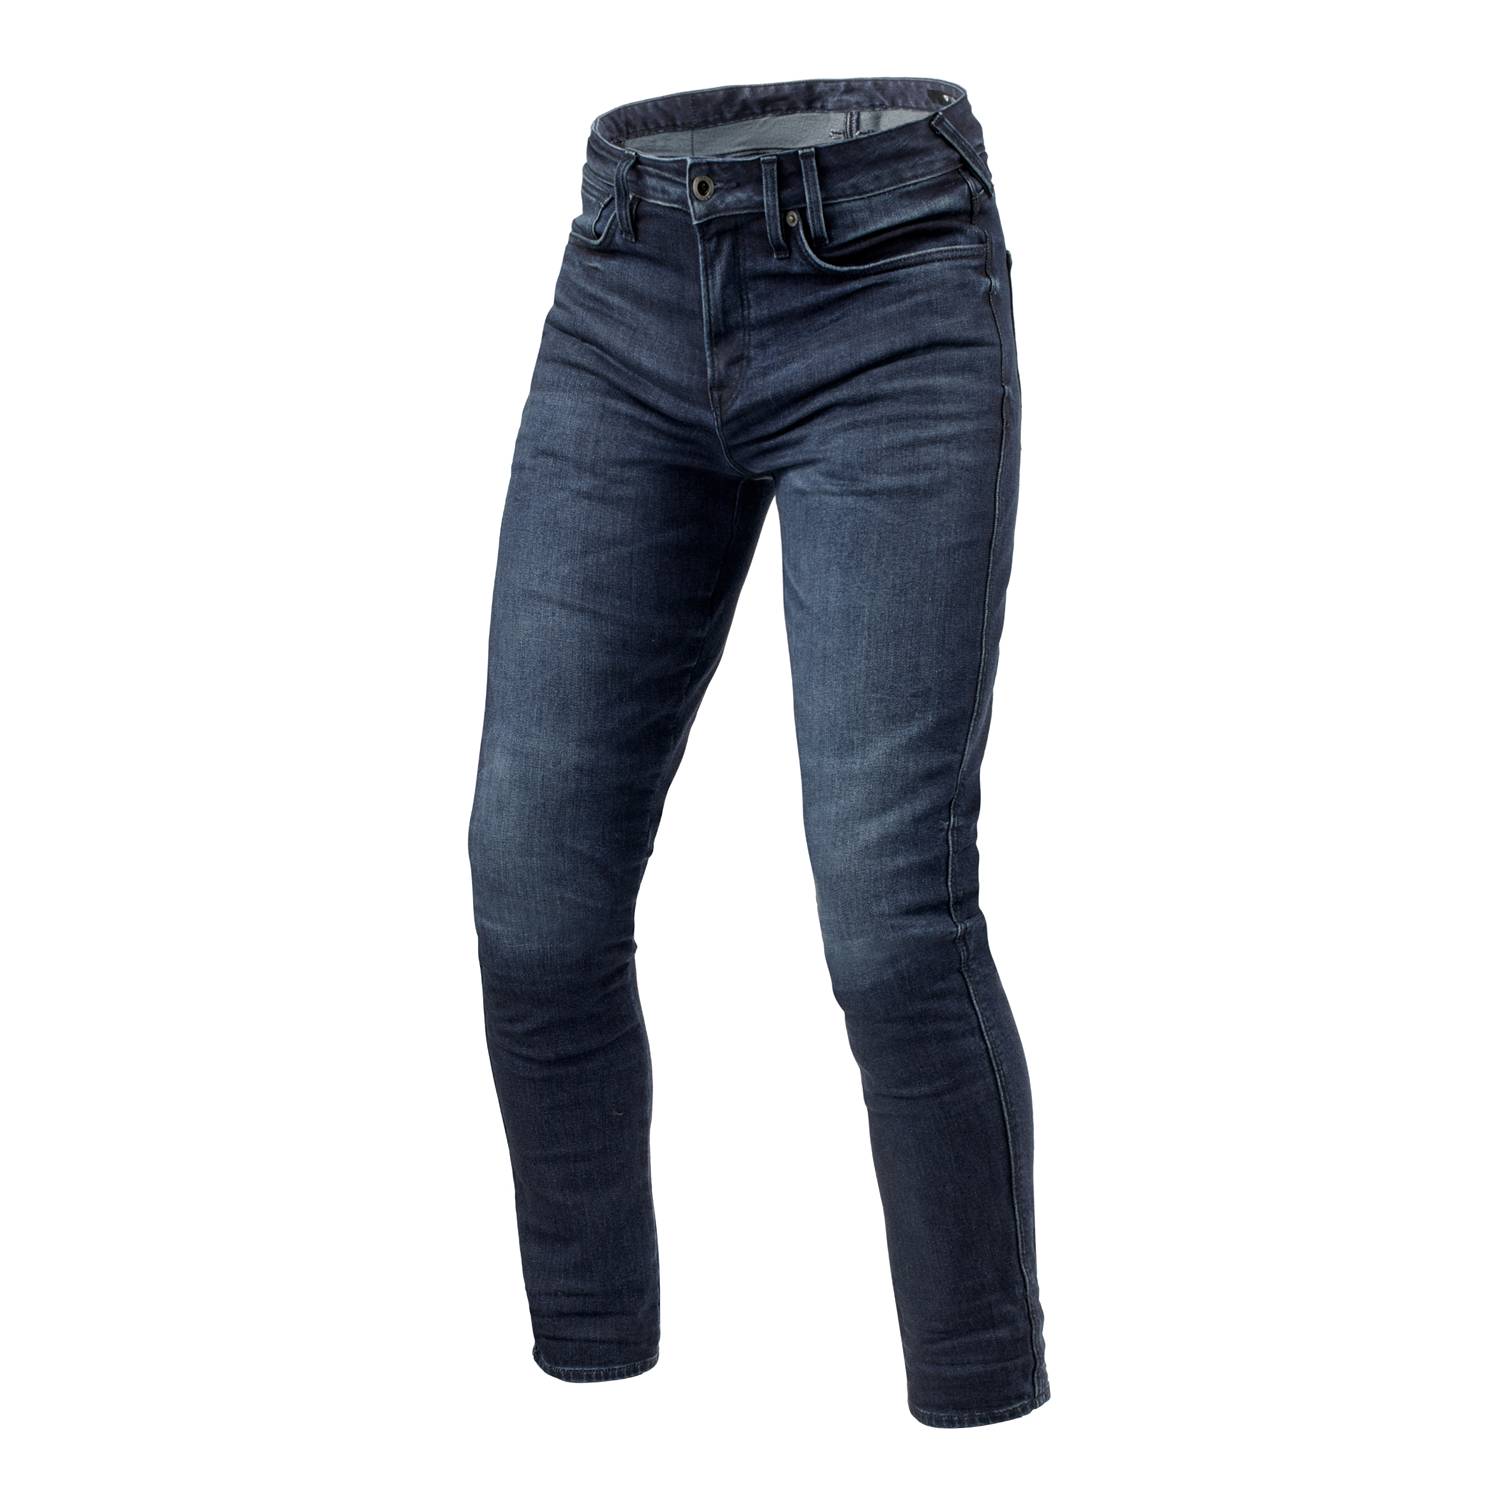 Image of REV'IT! Jeans Carlin SK Dark Blue Used L32 Motorcycle Jeans Taille L32/W36